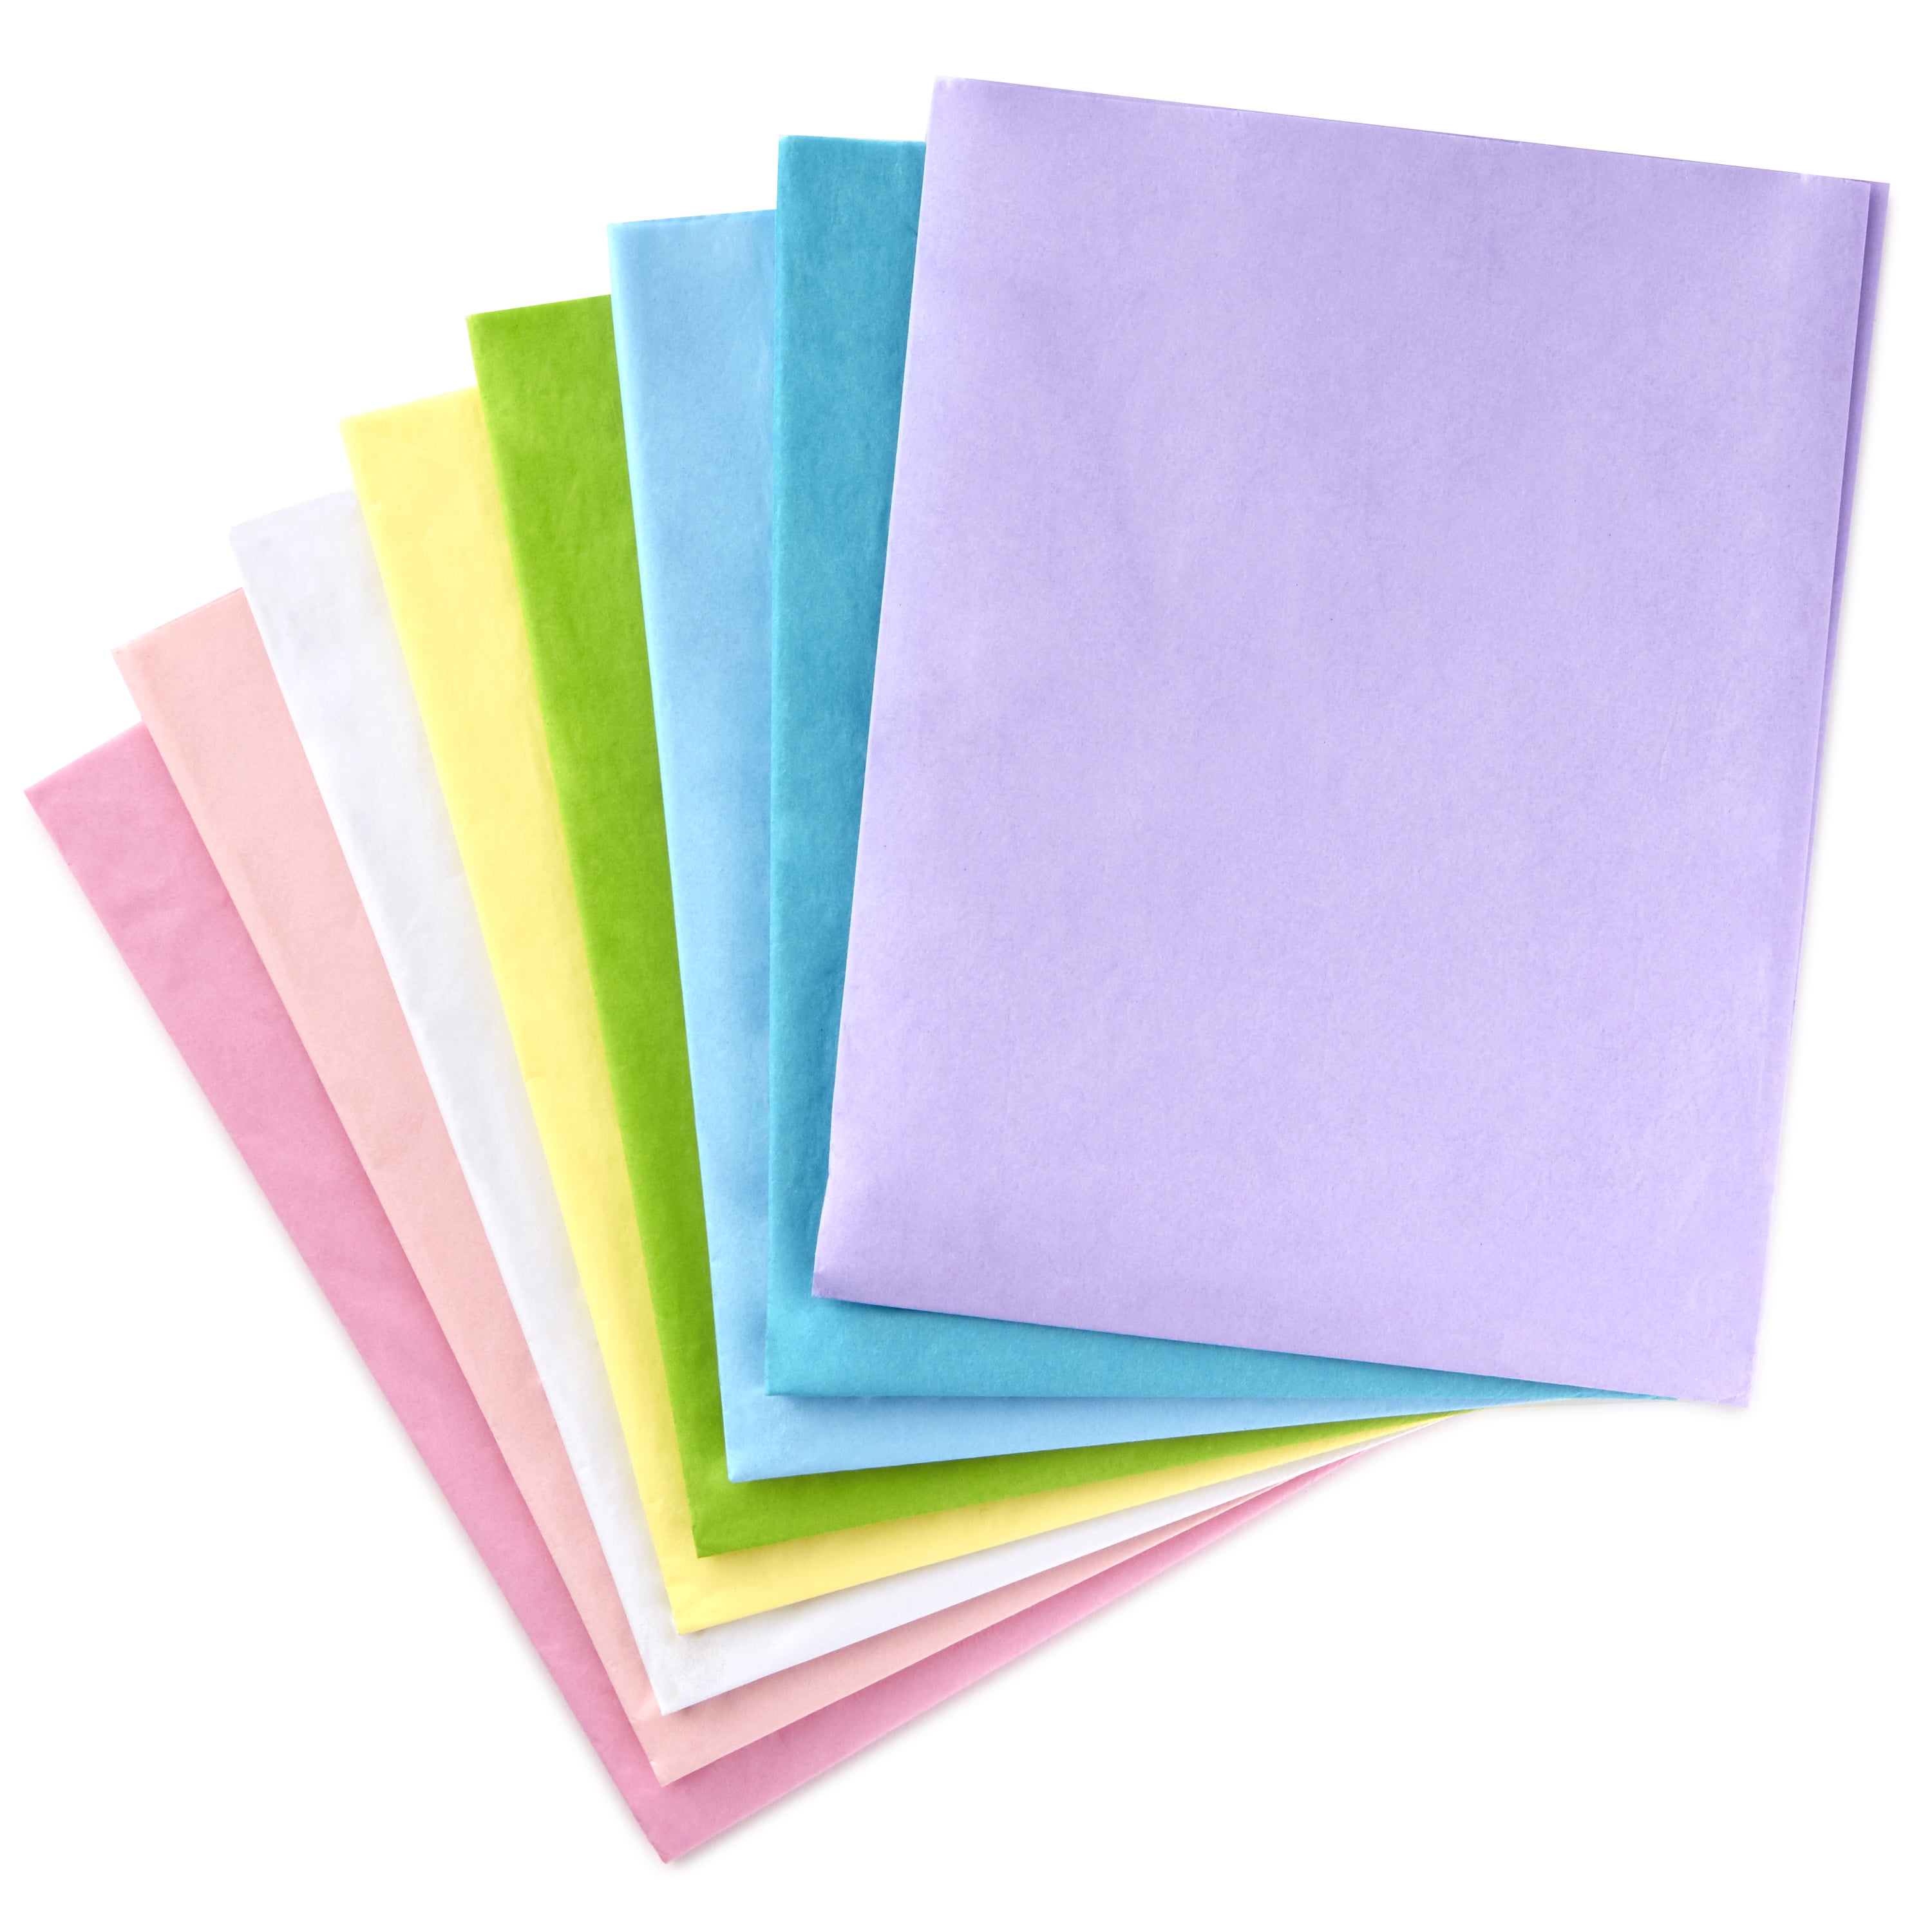 Hallmark Tissue Paper (Pastel Rainbow, 8 Colors) 120 Sheets for Easter, Mothers Day, Birthdays, Gift Wrap, Crafts, DIY Paper Flo